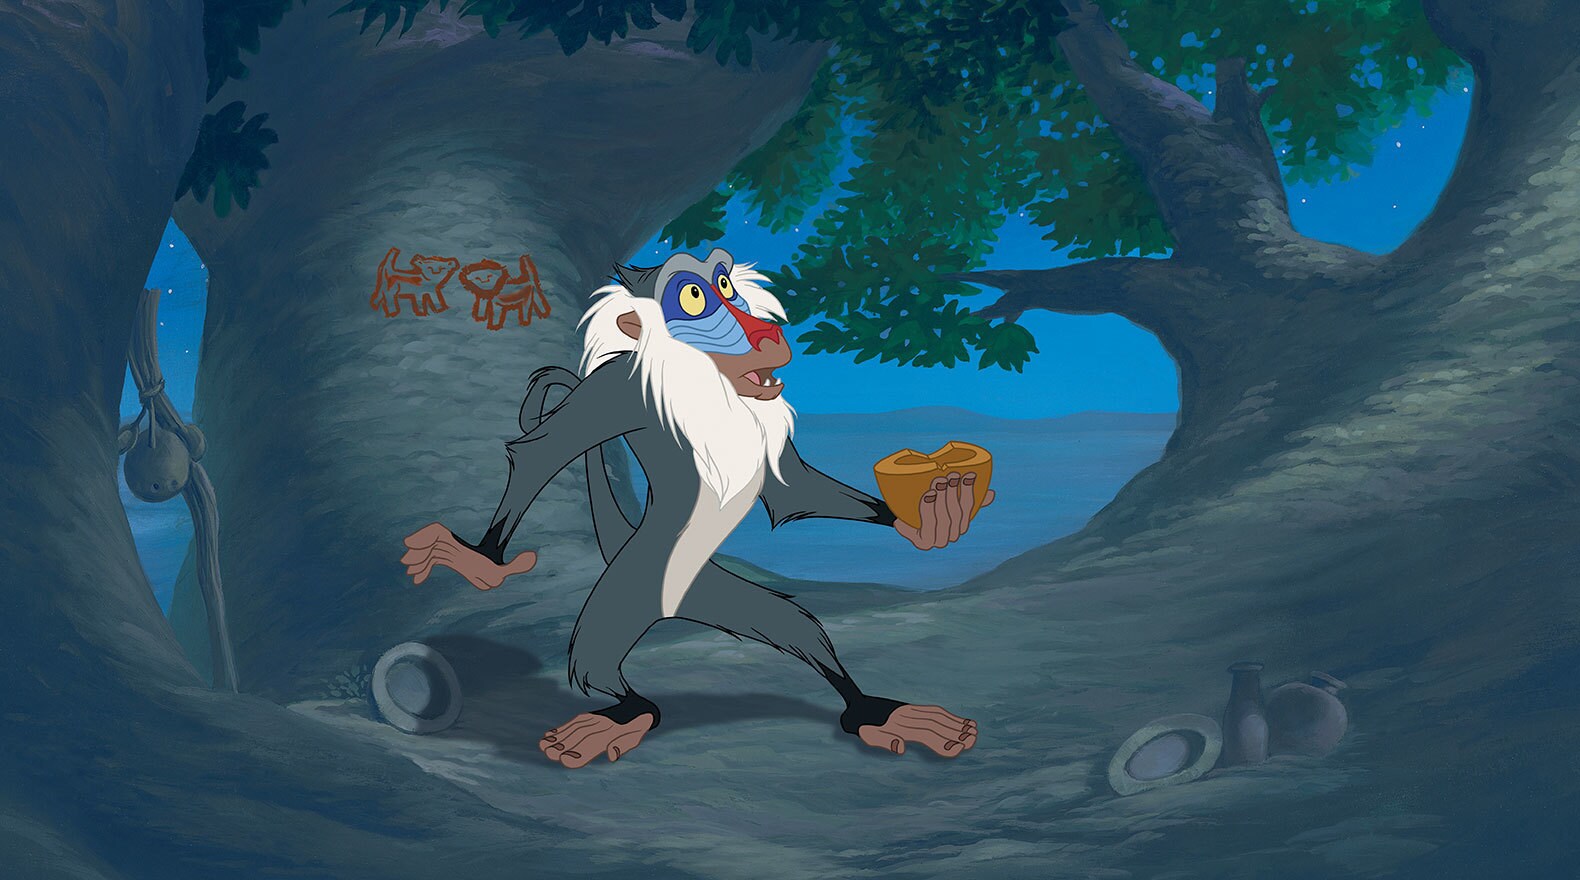 Rafiki (Robert Guillaume) has a vision while in his tree. From the movie "The Lion King 2: Simba's Pride"